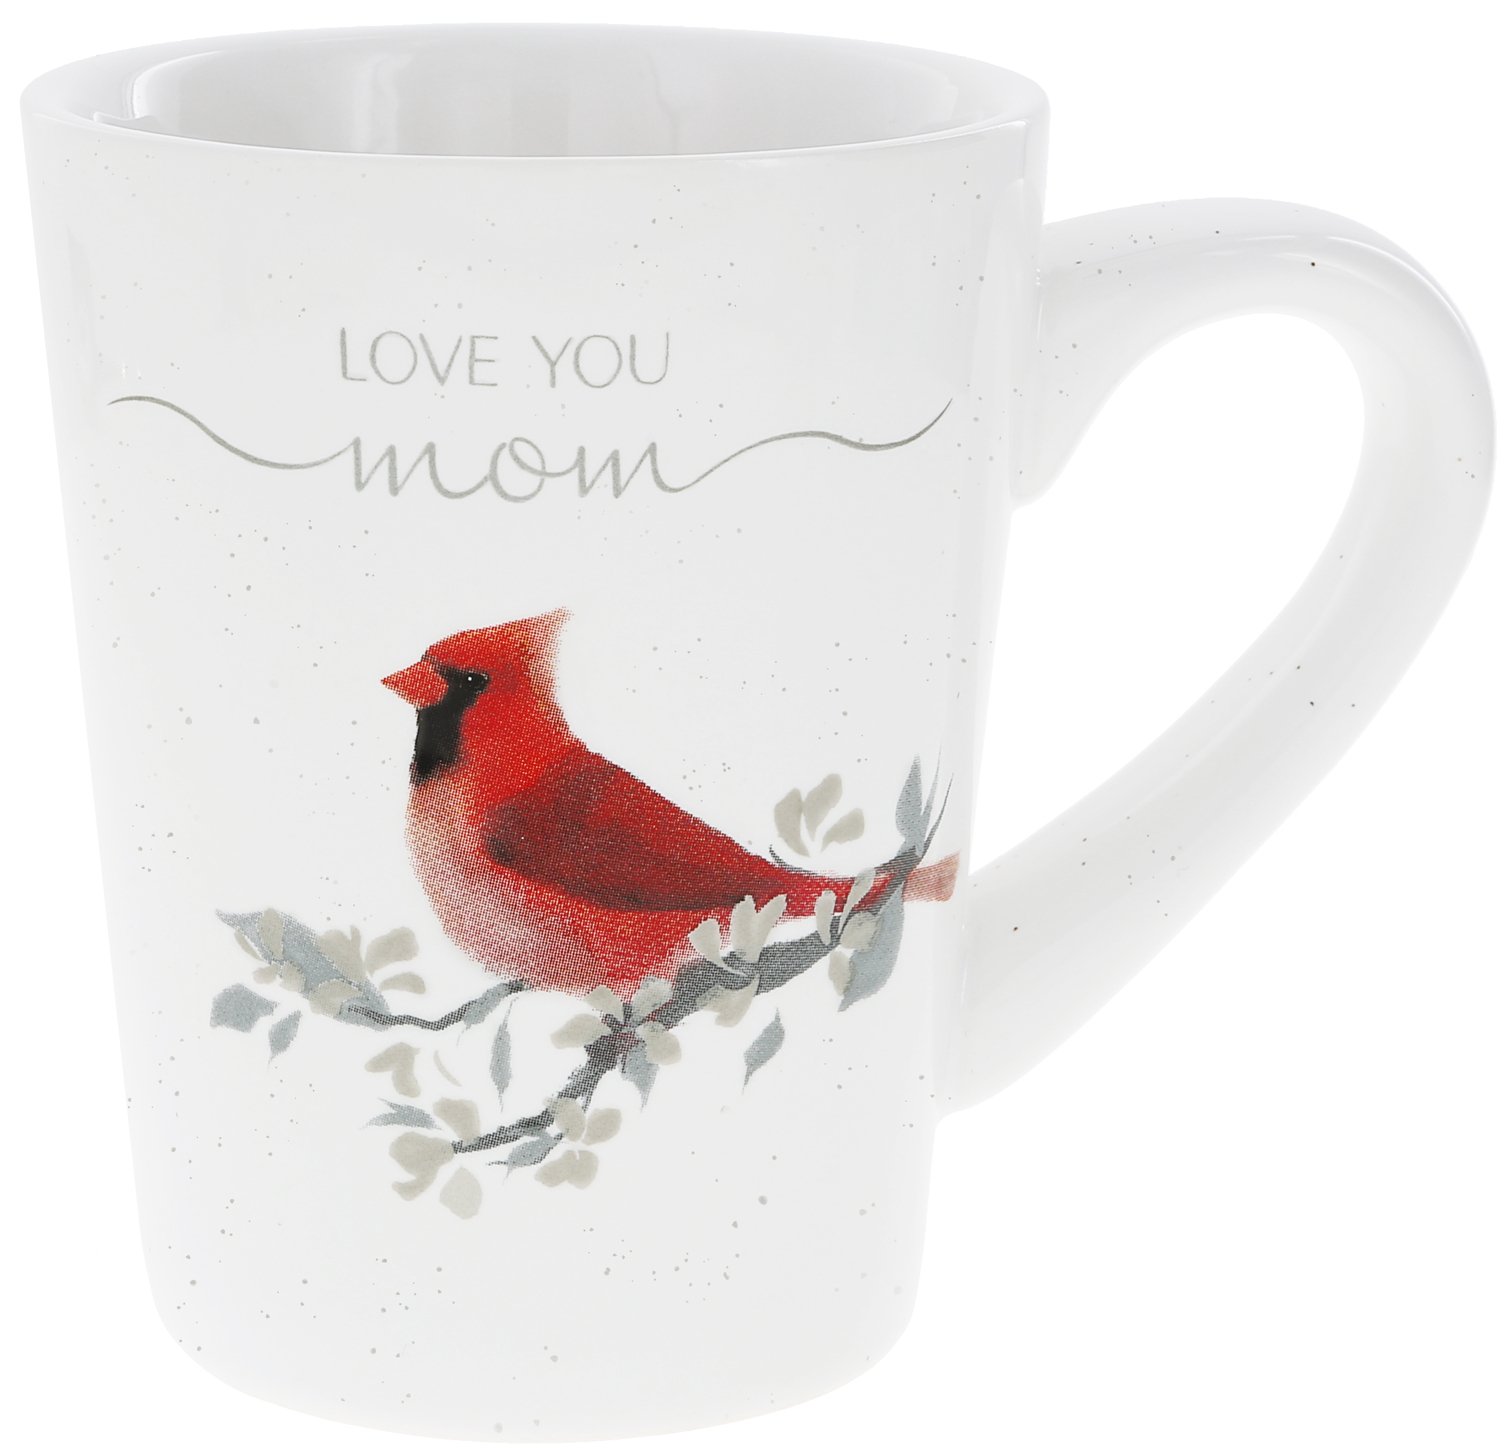 Mom by Always by Your Side - Mom - 13 oz Cup